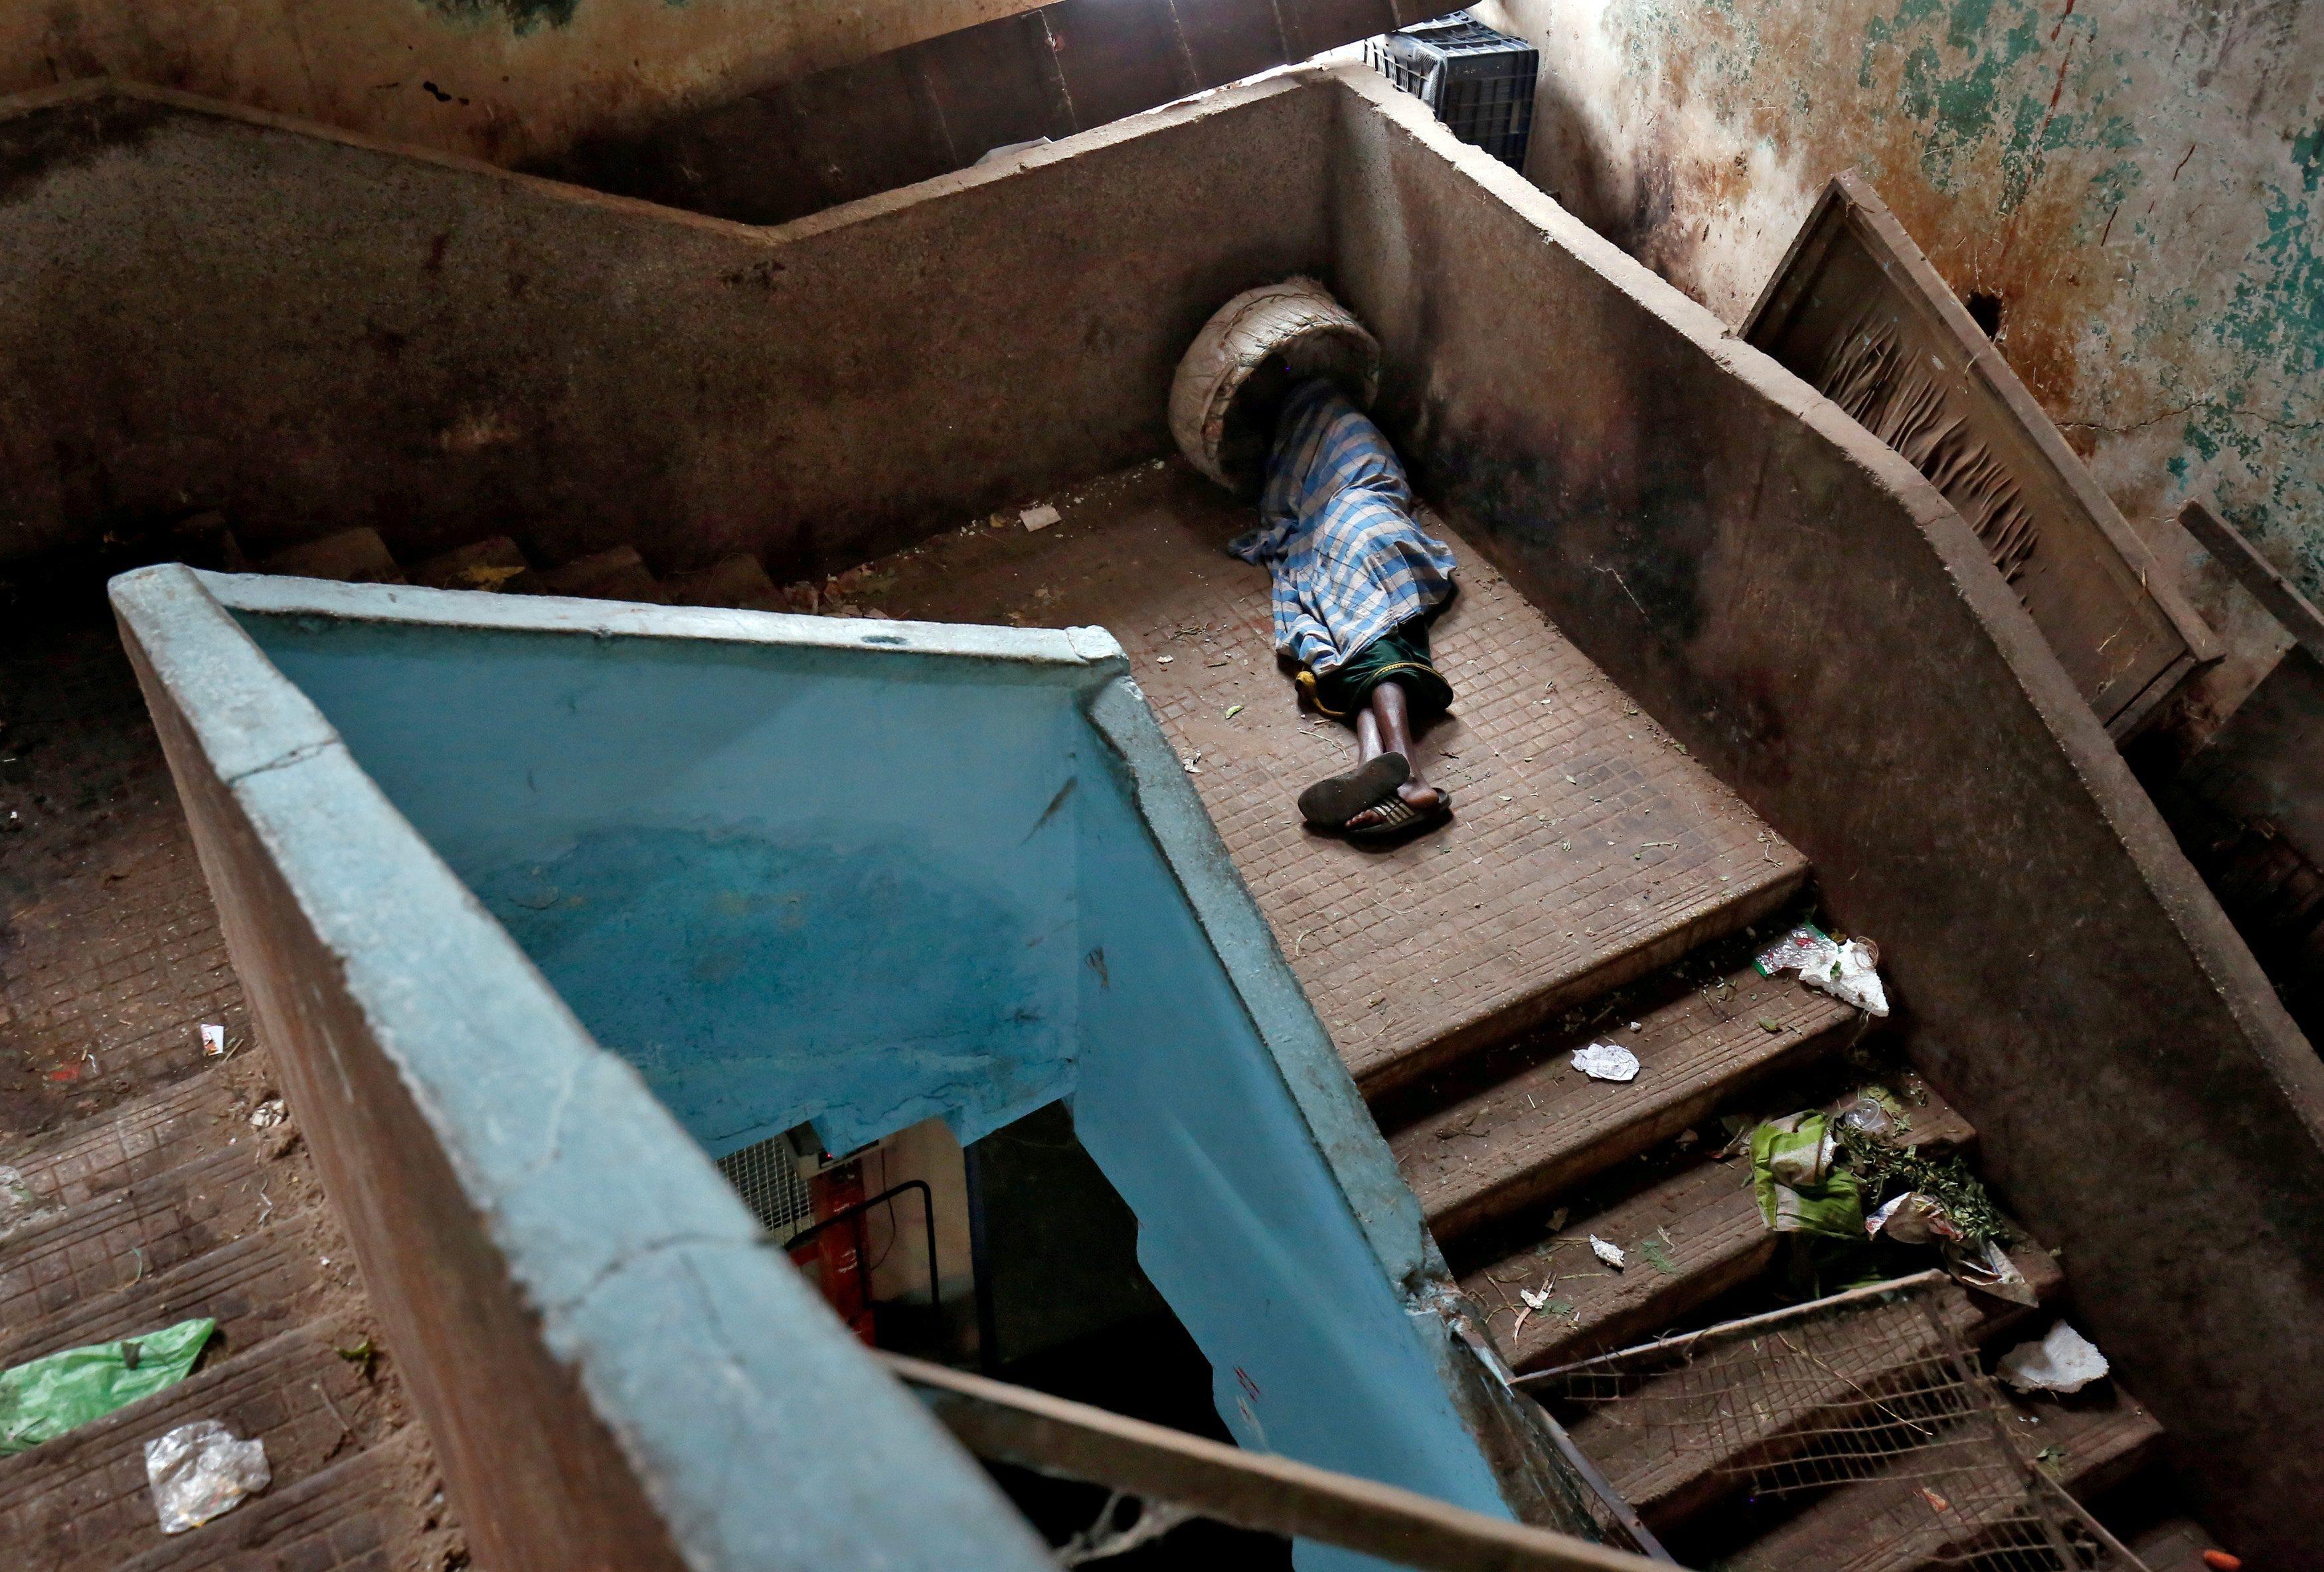 A porter sleeps on a stairway at a wholesale market in Bengaluru